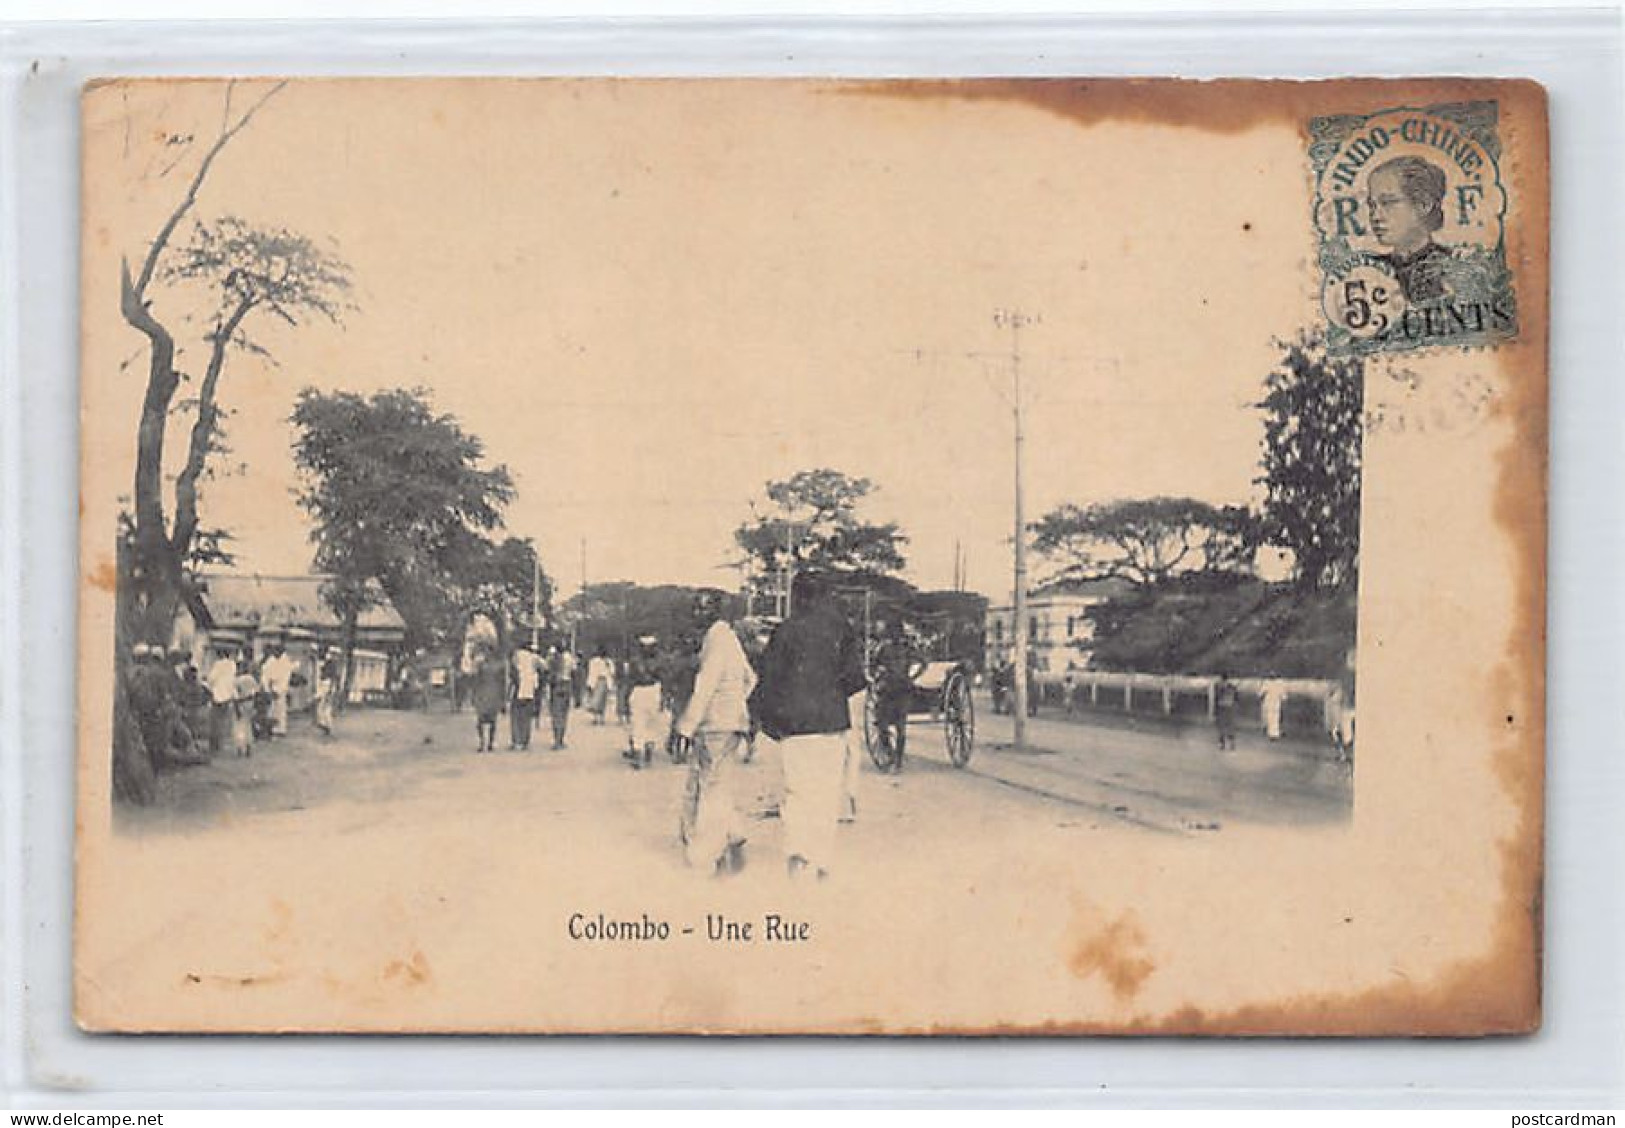 Sri Lanka - COLOMBO - A Street - SEE SCANS FOR CONDITION - Publ. In France  - Sri Lanka (Ceylon)